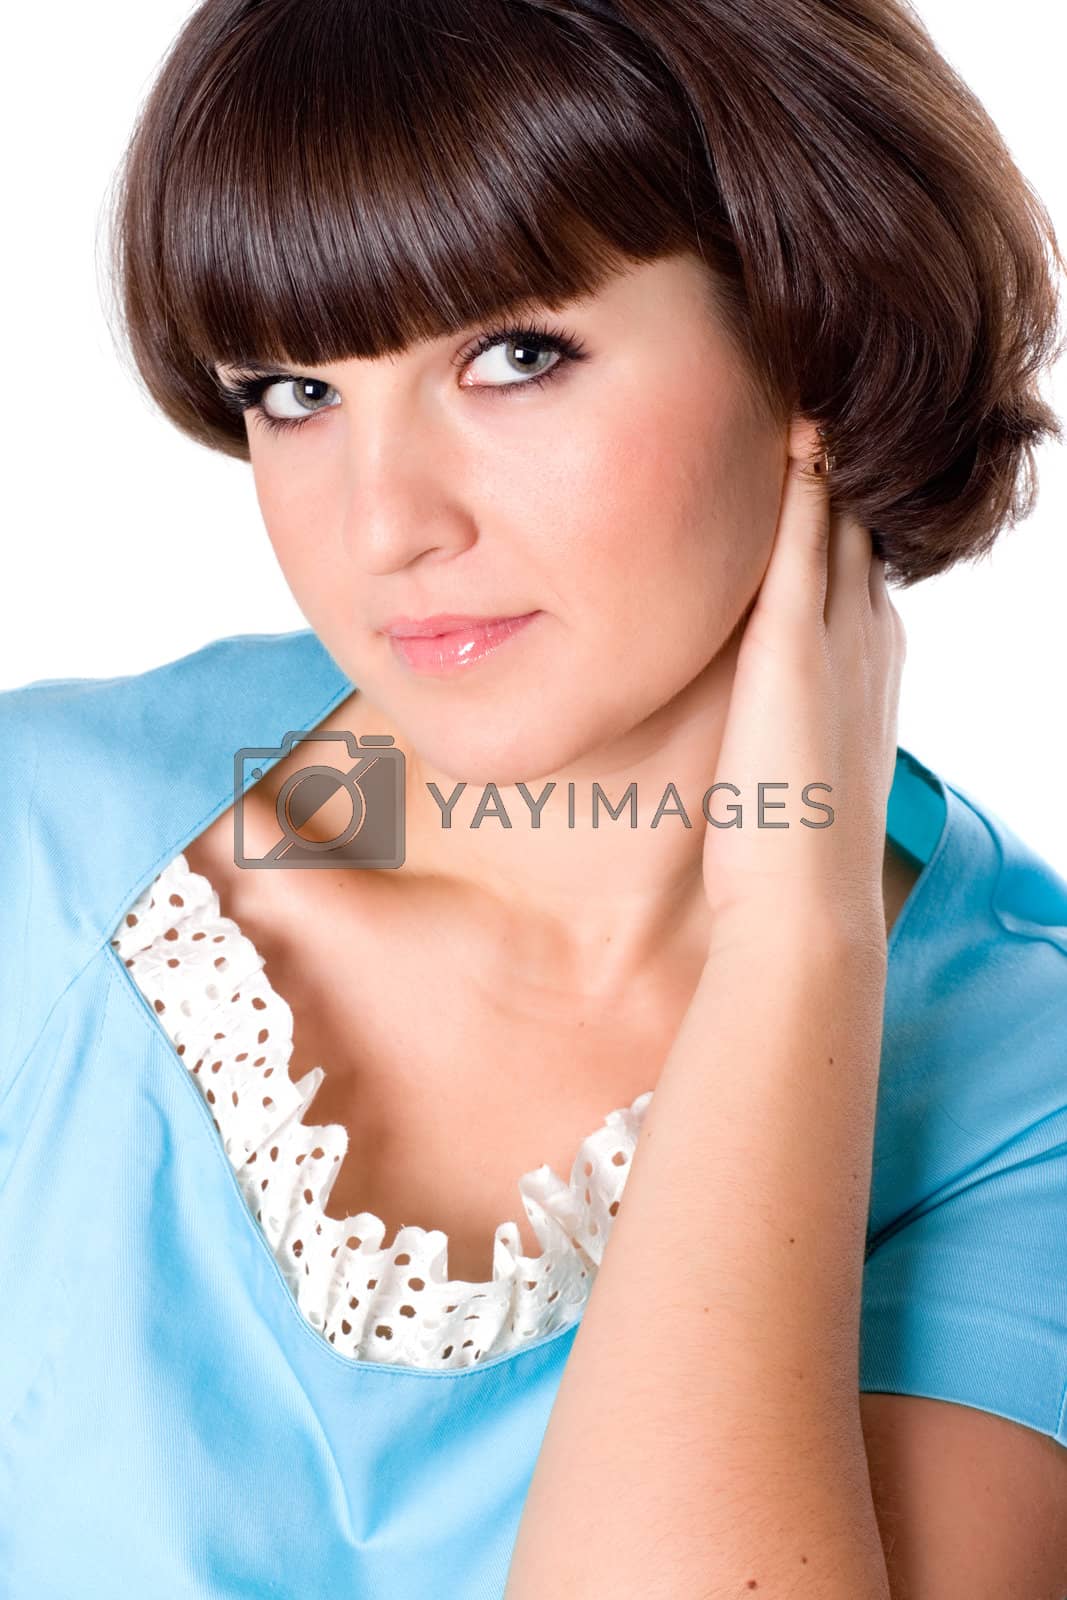 Royalty free image of attractive brunet woman by marylooo